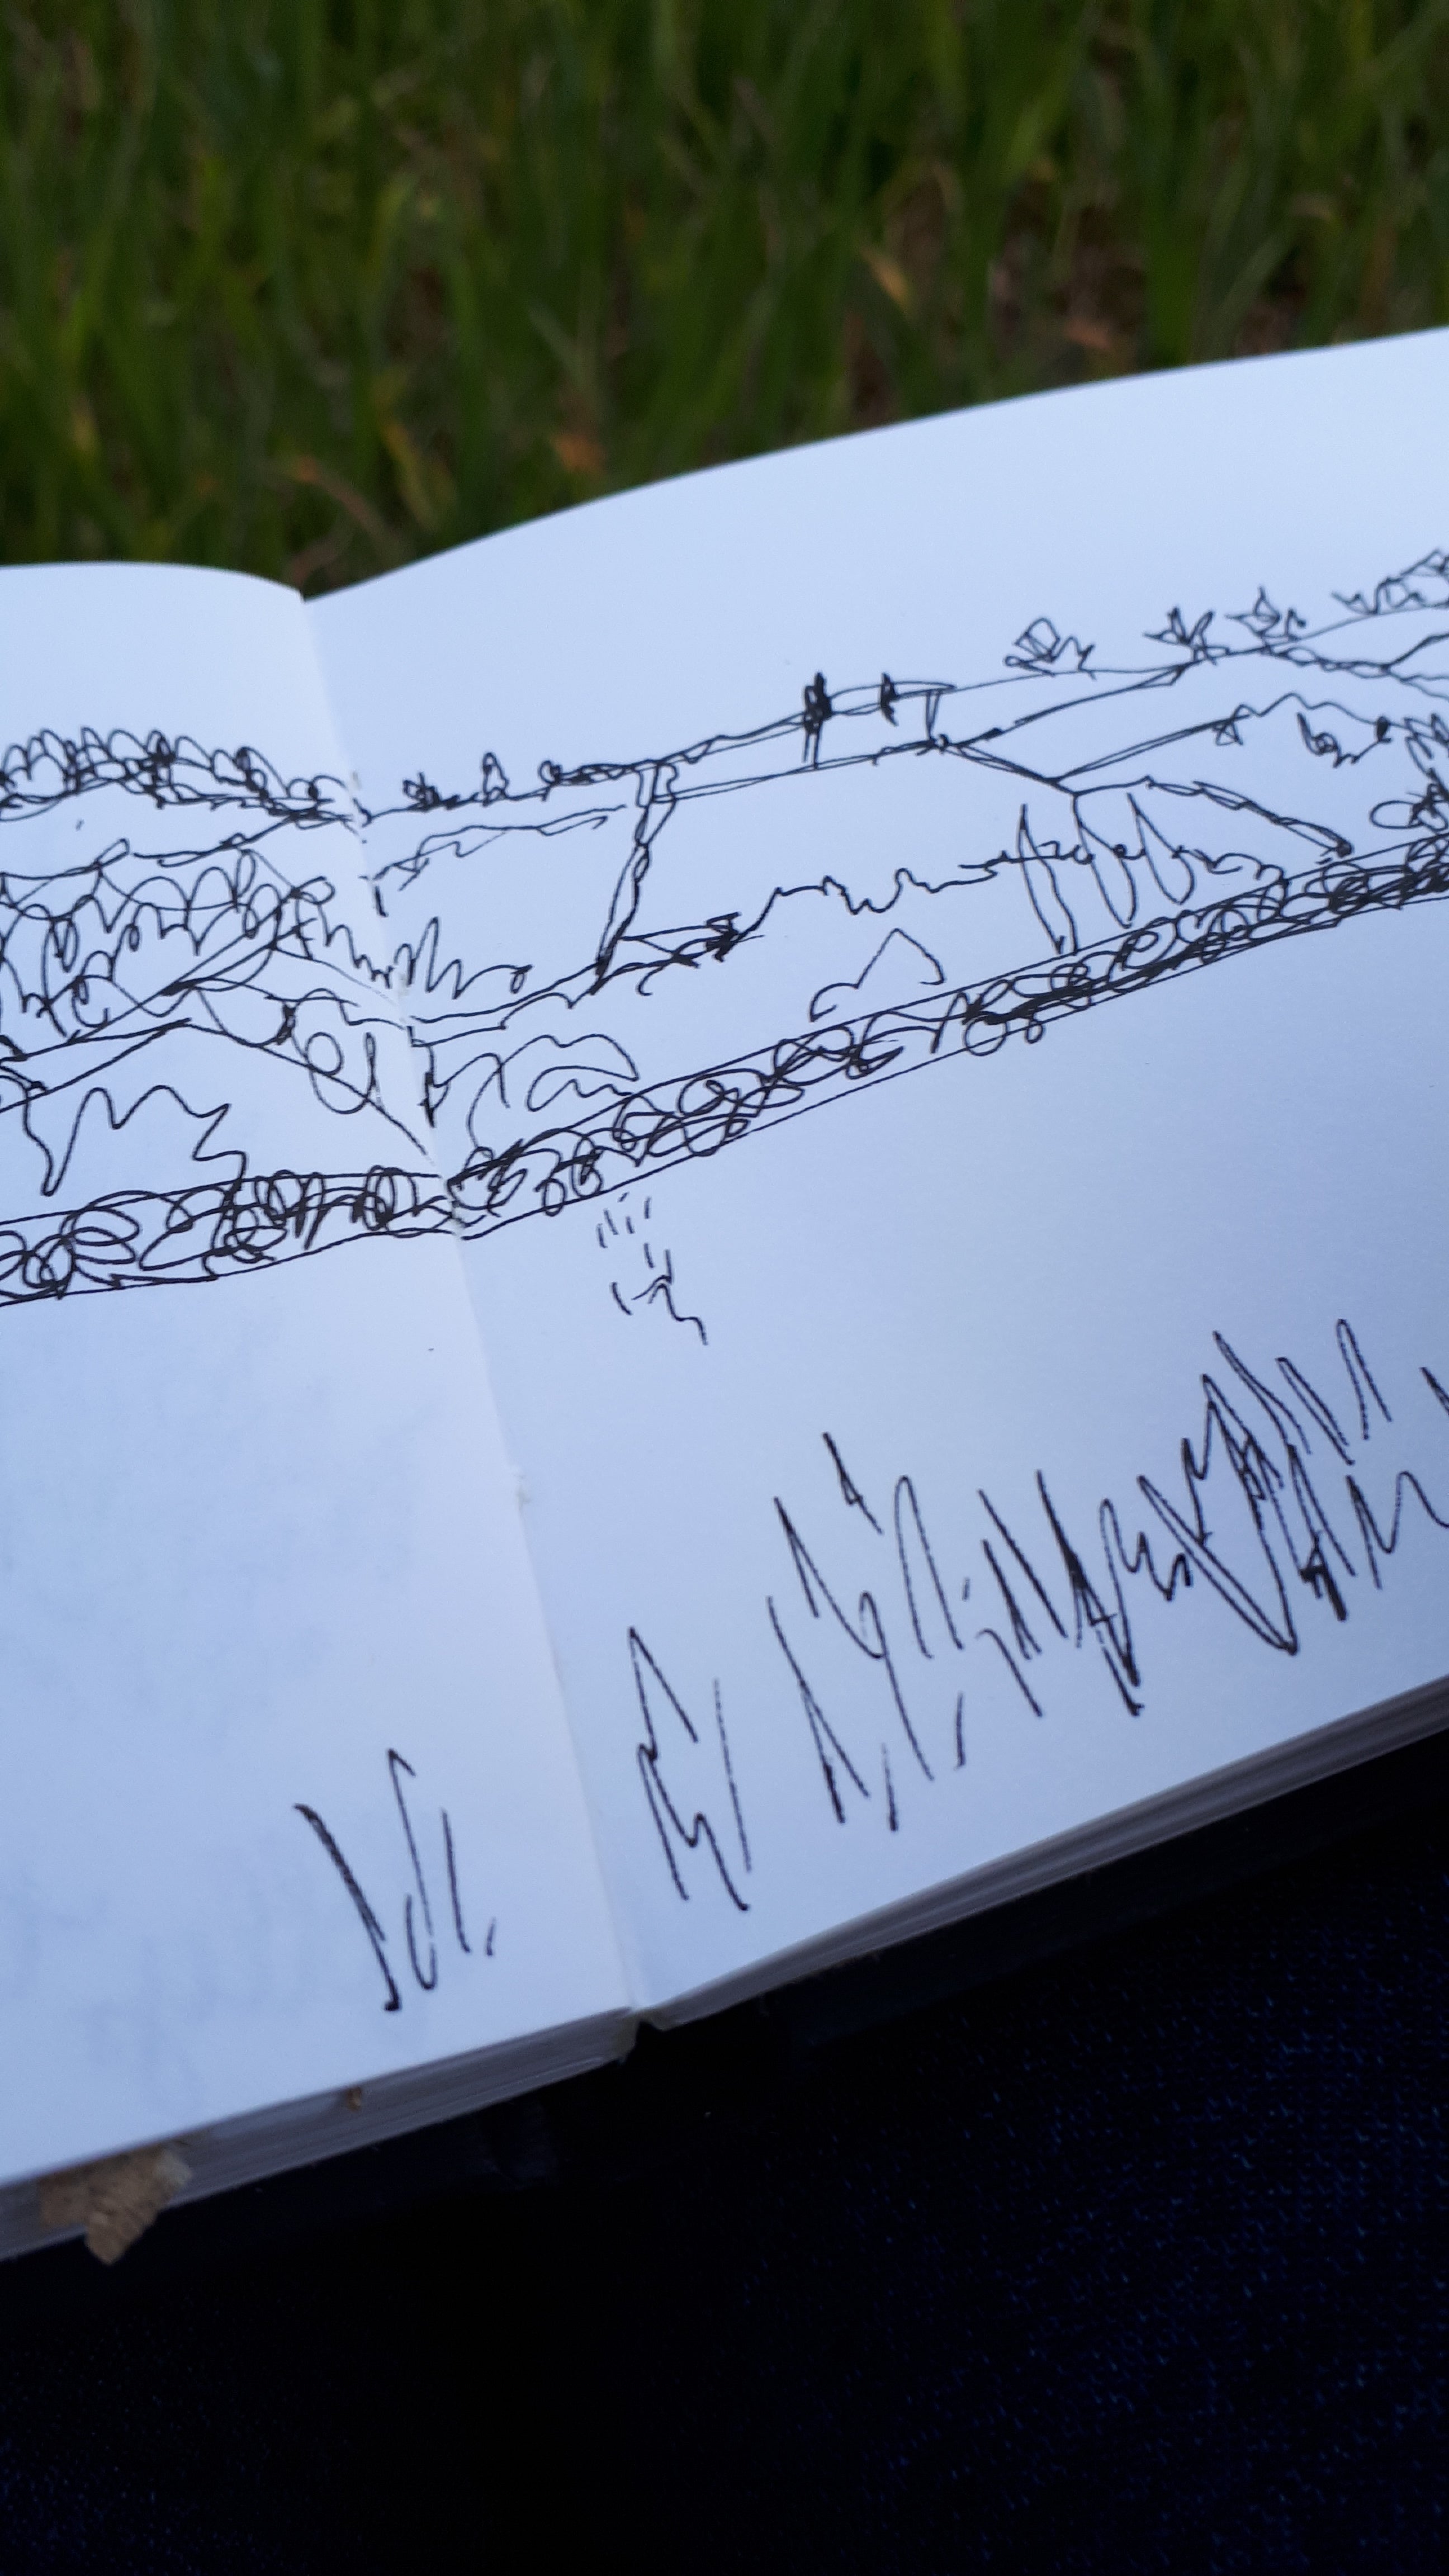 Field sketching by Alice Draws the Line, sketchbook study